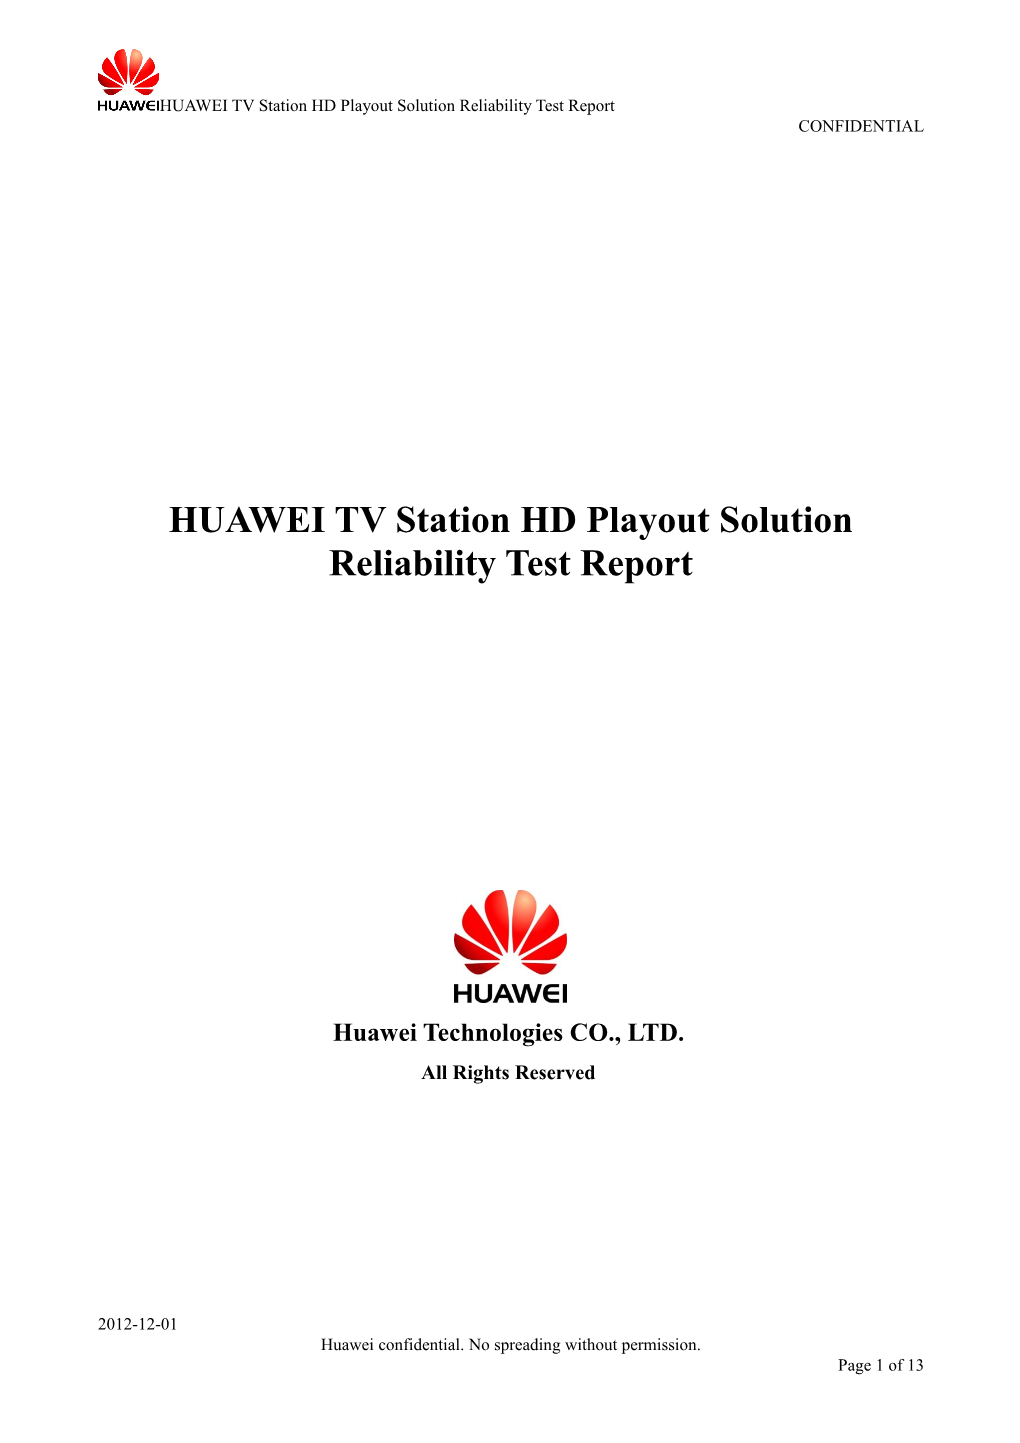 HUAWEI TV Station HD Playout Solution Reliability Test Report